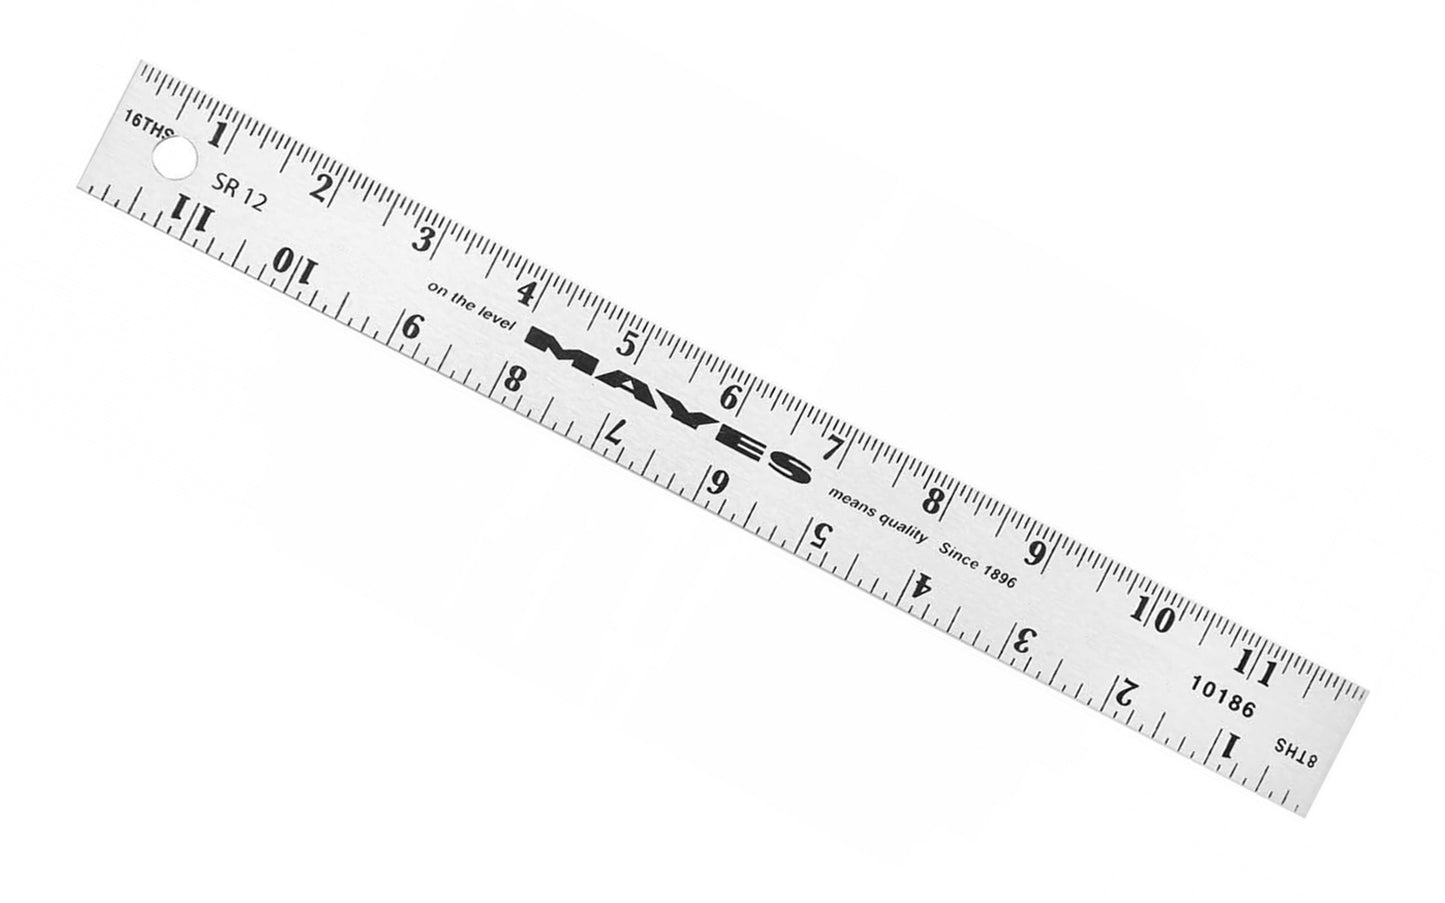 Mayes 12" Aluminum Rule ~ Model No. 10186 ~ Made of sturdy, extruded & lightweight aluminum ~ 8ths & 16ths graduations ~ Thermo-bonded embossed graduations ~ 12" overall length